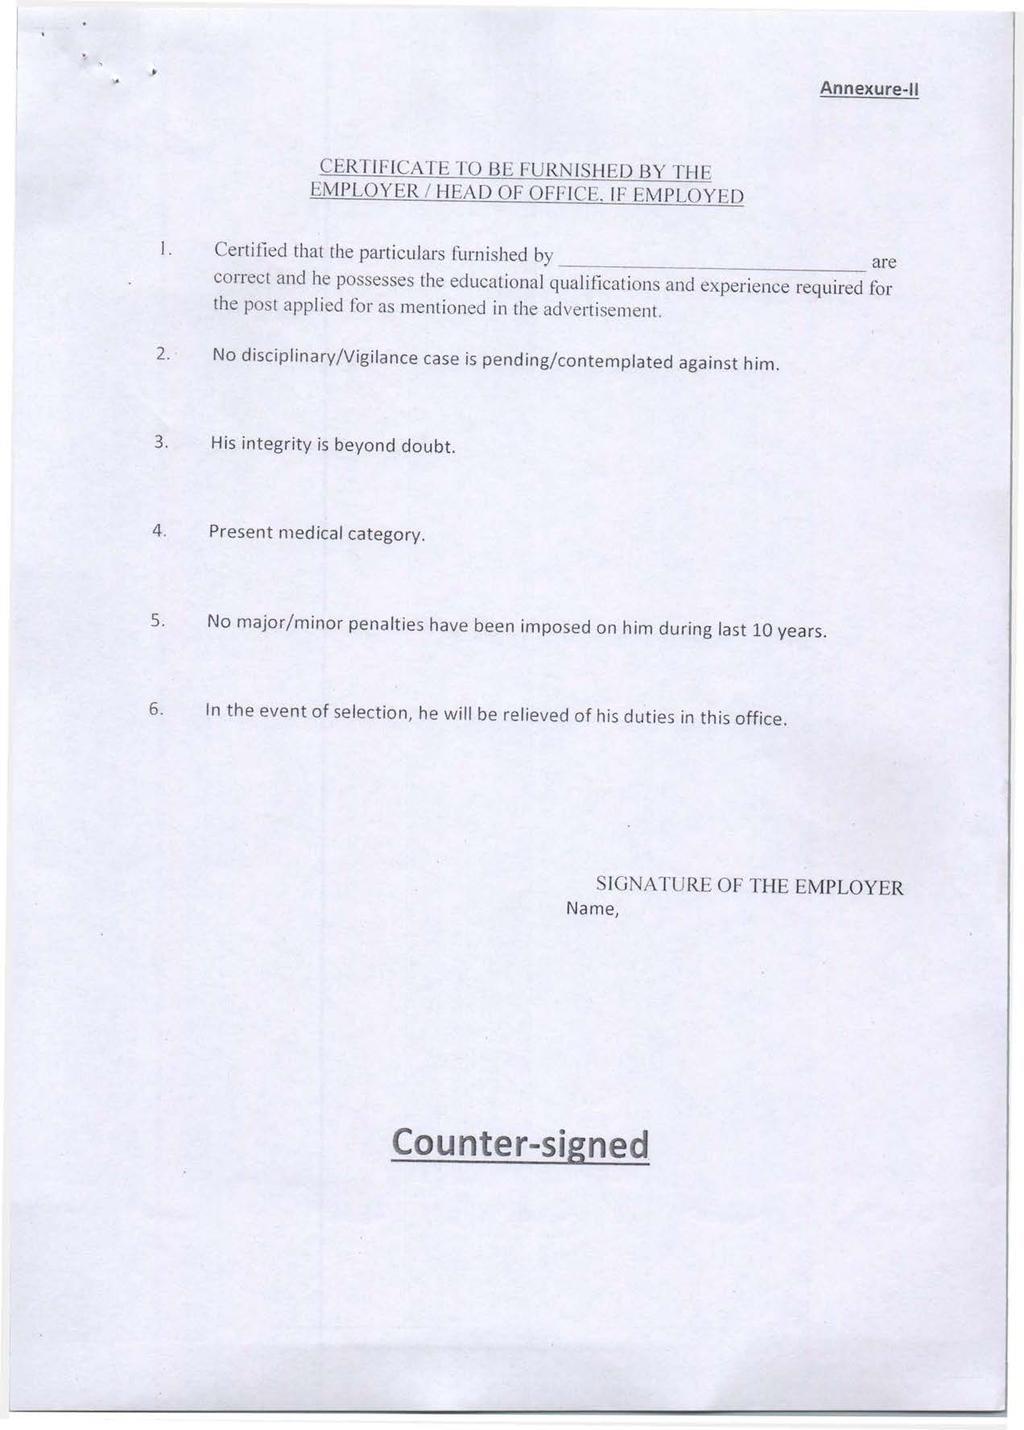 Annexure-11 CERTIFICATE TO BE FURNISHED BY THE EMPLOYER I HEAD OF OFFICE. IF EMPLOYED 1.